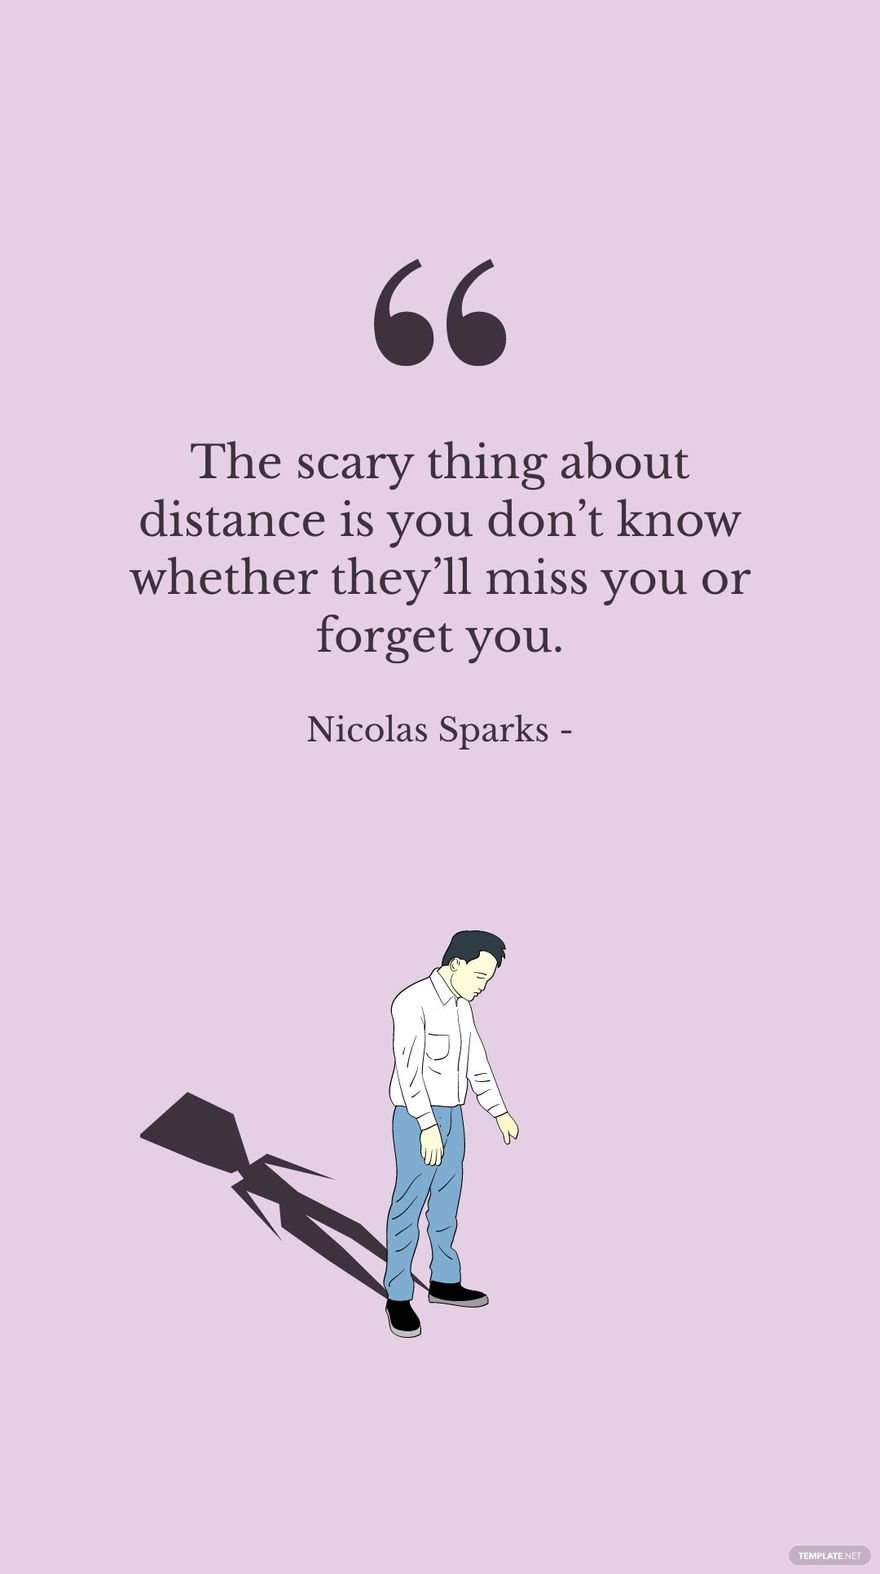 Nicolas Sparks - The scary thing about distance is you don’t know whether they’ll miss you or forget you.